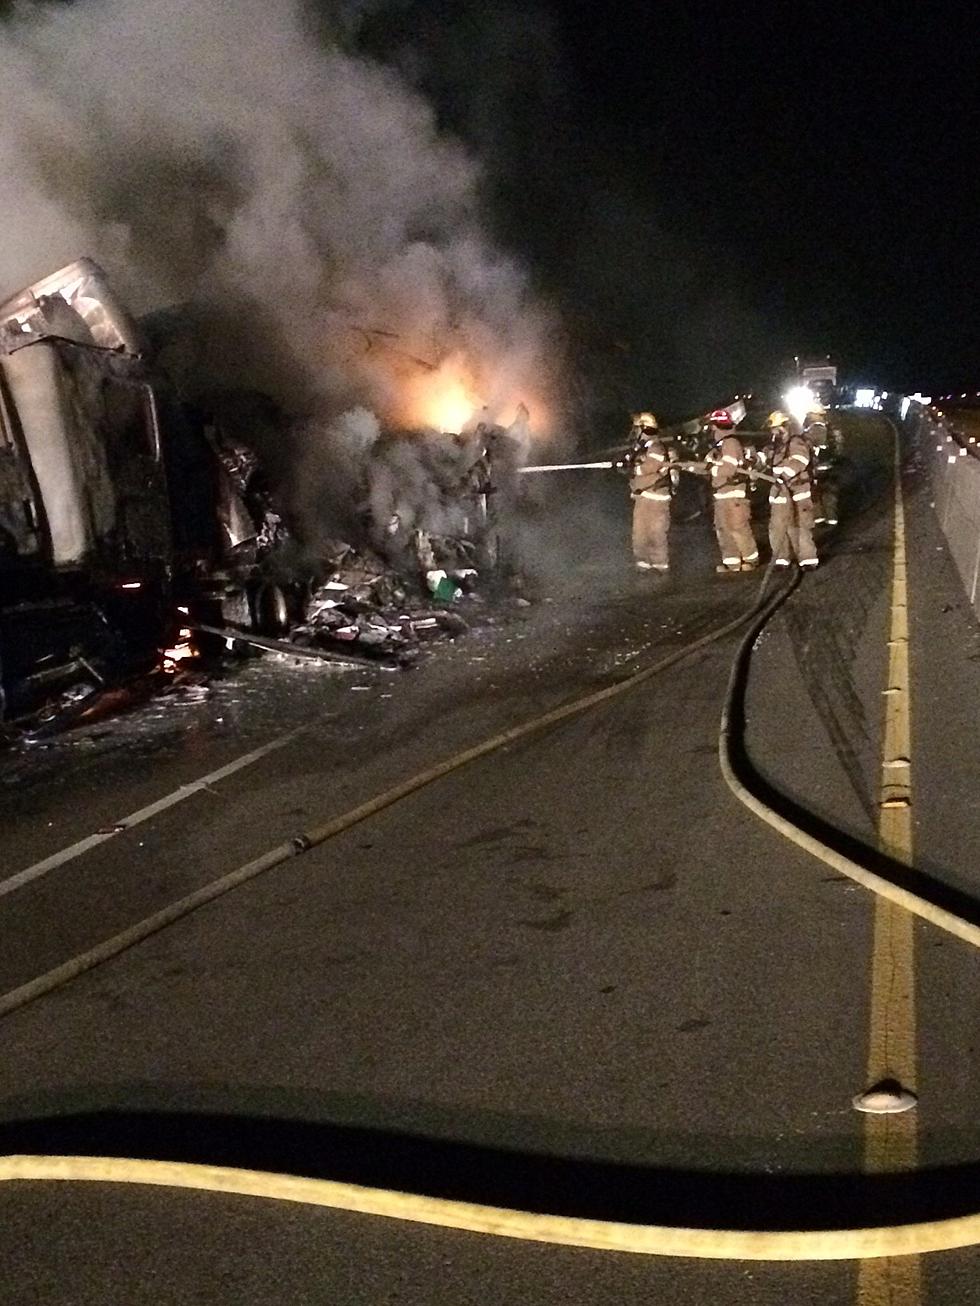 Tractor Trailer Fire Causes Major Delays on I-35 in Temple